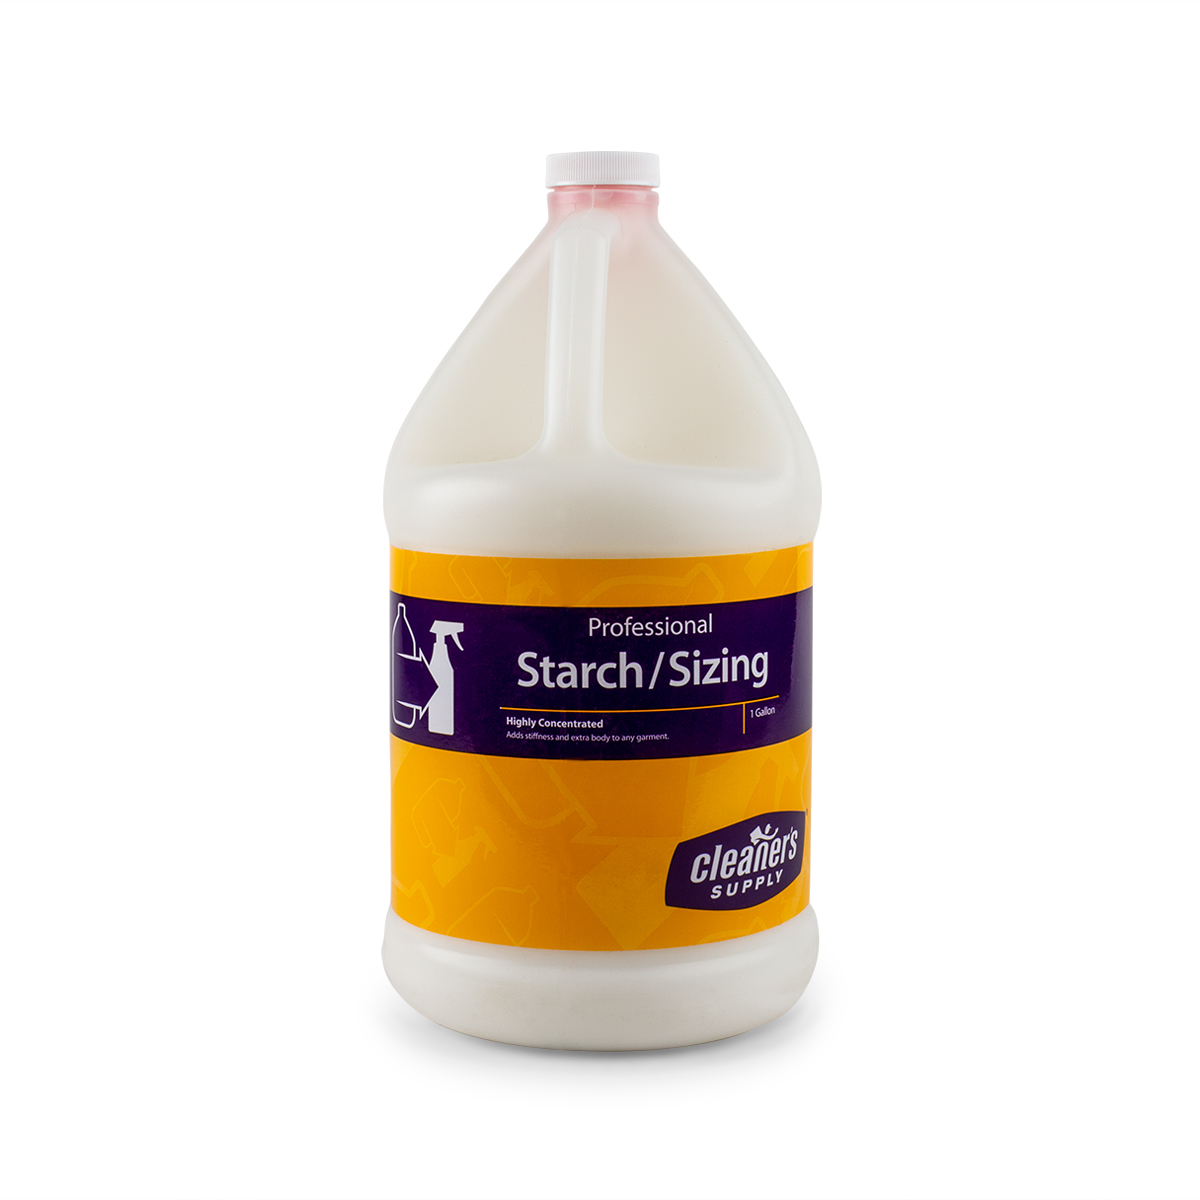 Industrial Spray Starch/Sizing - 1 gal. - Cleaner's Supply